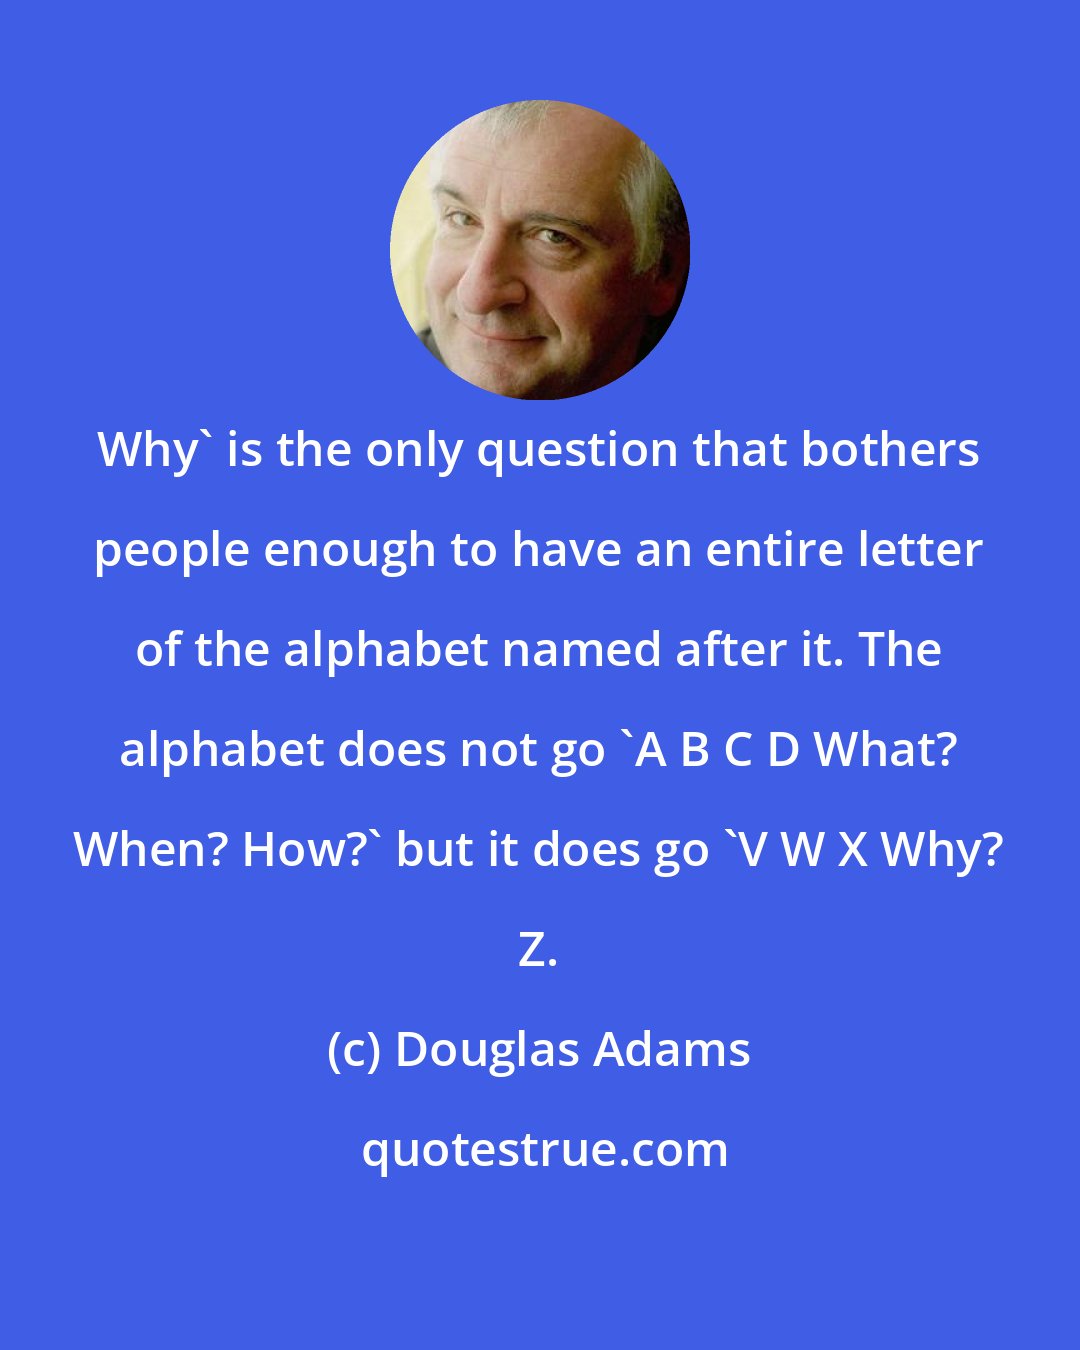 Douglas Adams: Why' is the only question that bothers people enough to have an entire letter of the alphabet named after it. The alphabet does not go 'A B C D What? When? How?' but it does go 'V W X Why? Z.